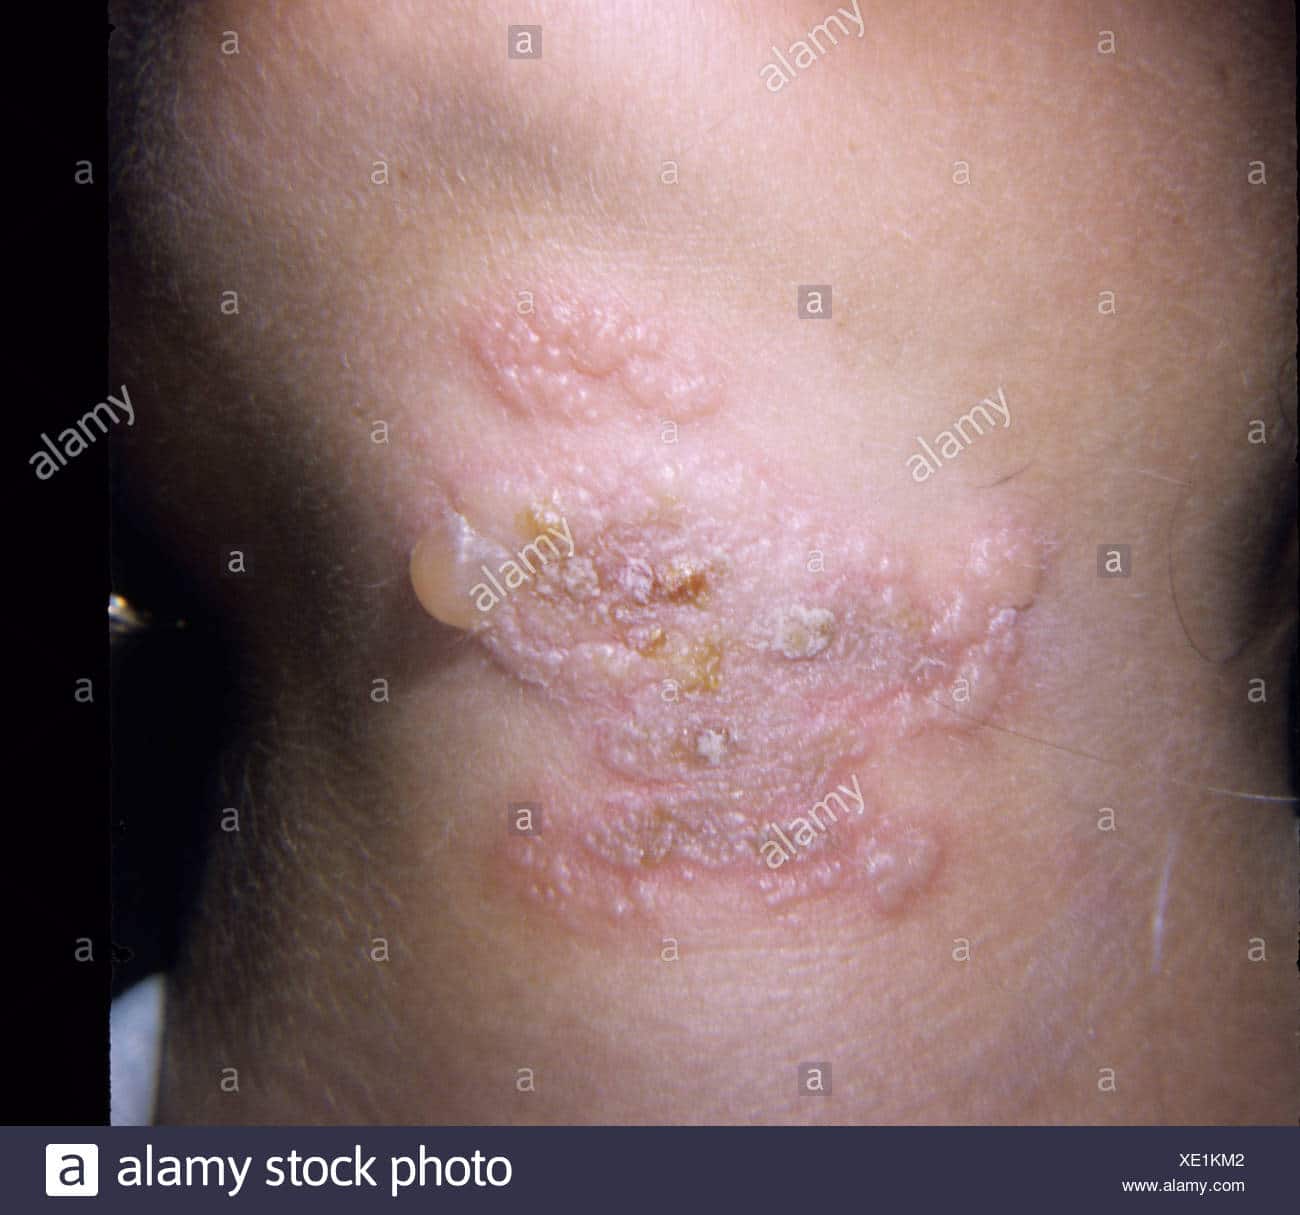 Herpes simplex rash on the patient